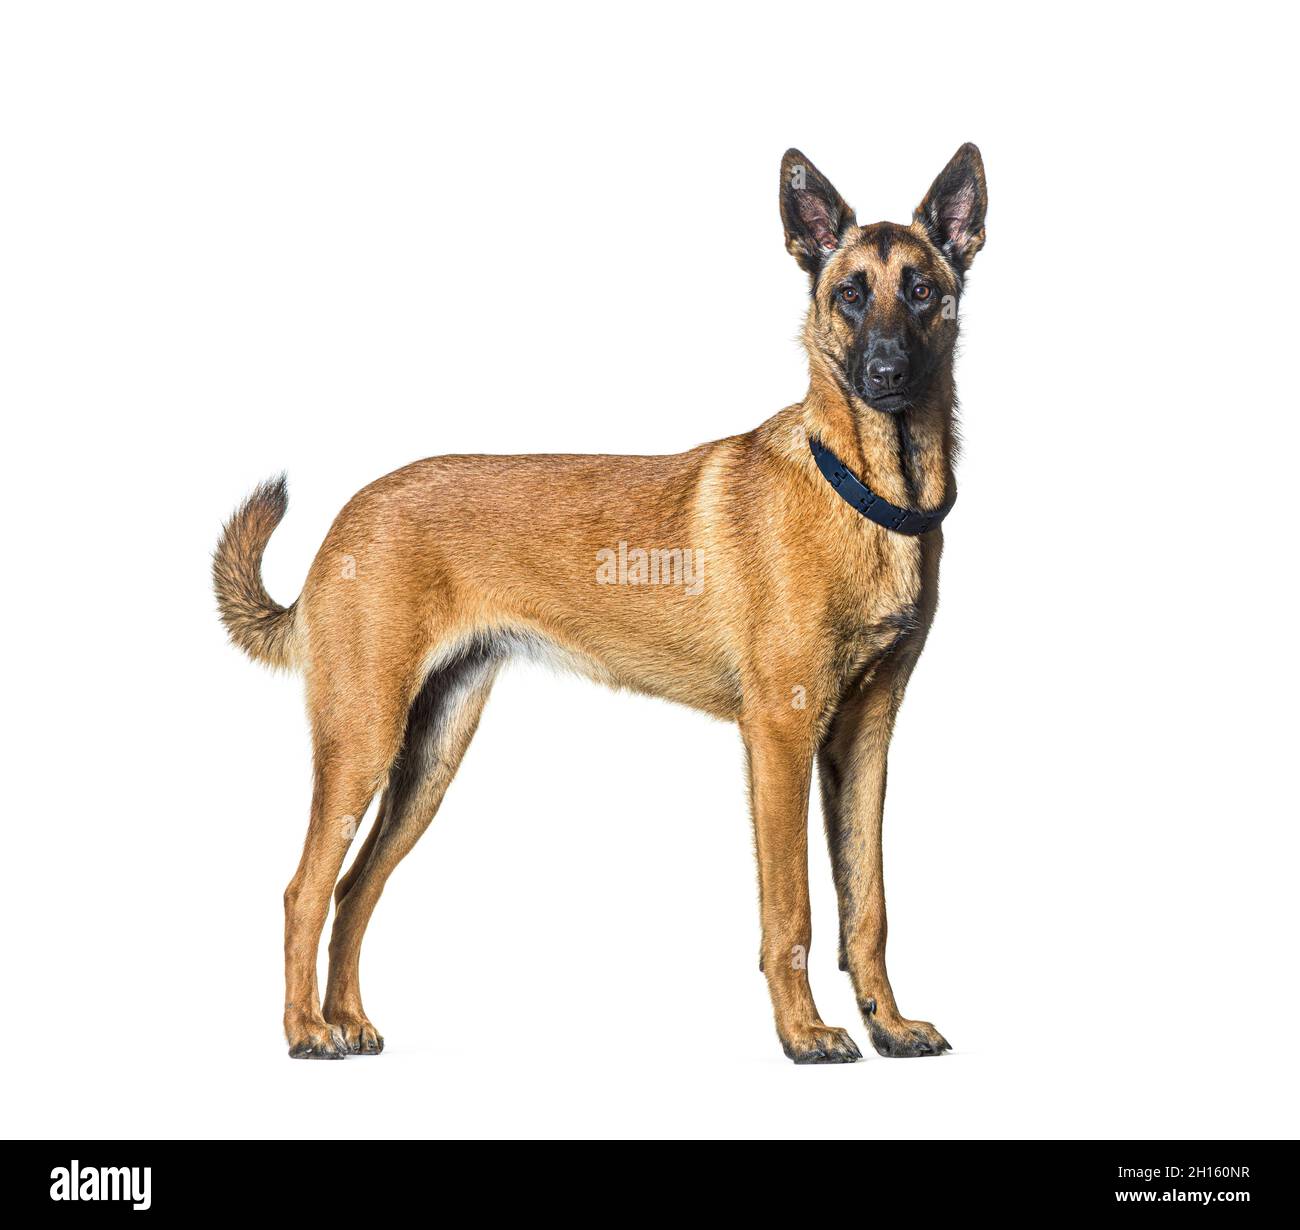 Side view of a Standing Malinois dog looking at the camera and wearing a collar, Isolated on white Stock Photo